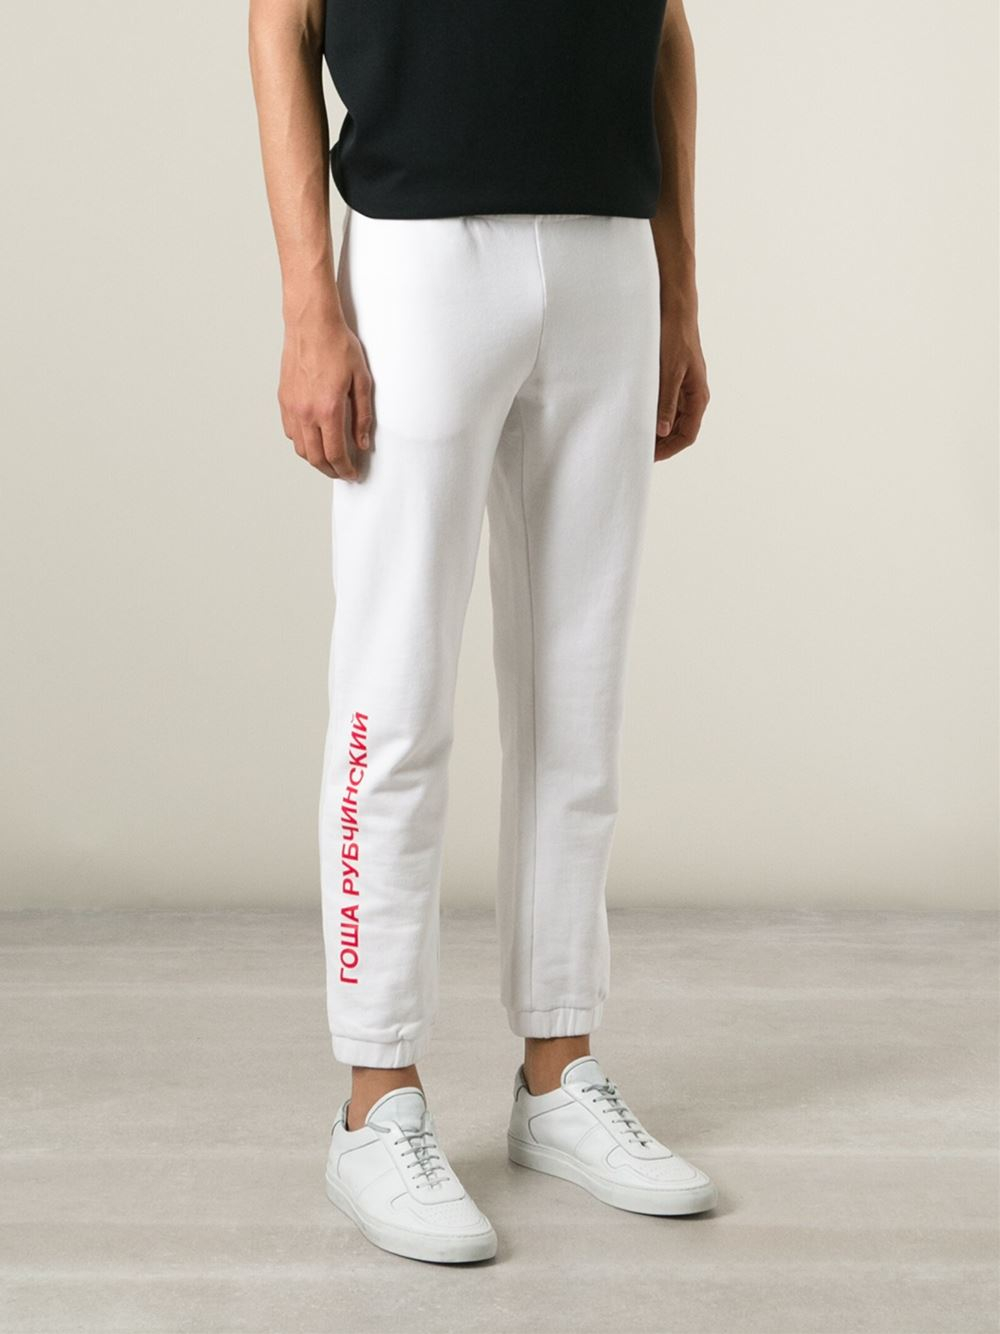 L4] Looking for sweatpants with similar fit to the Gosha Sweatpants :  r/streetwear